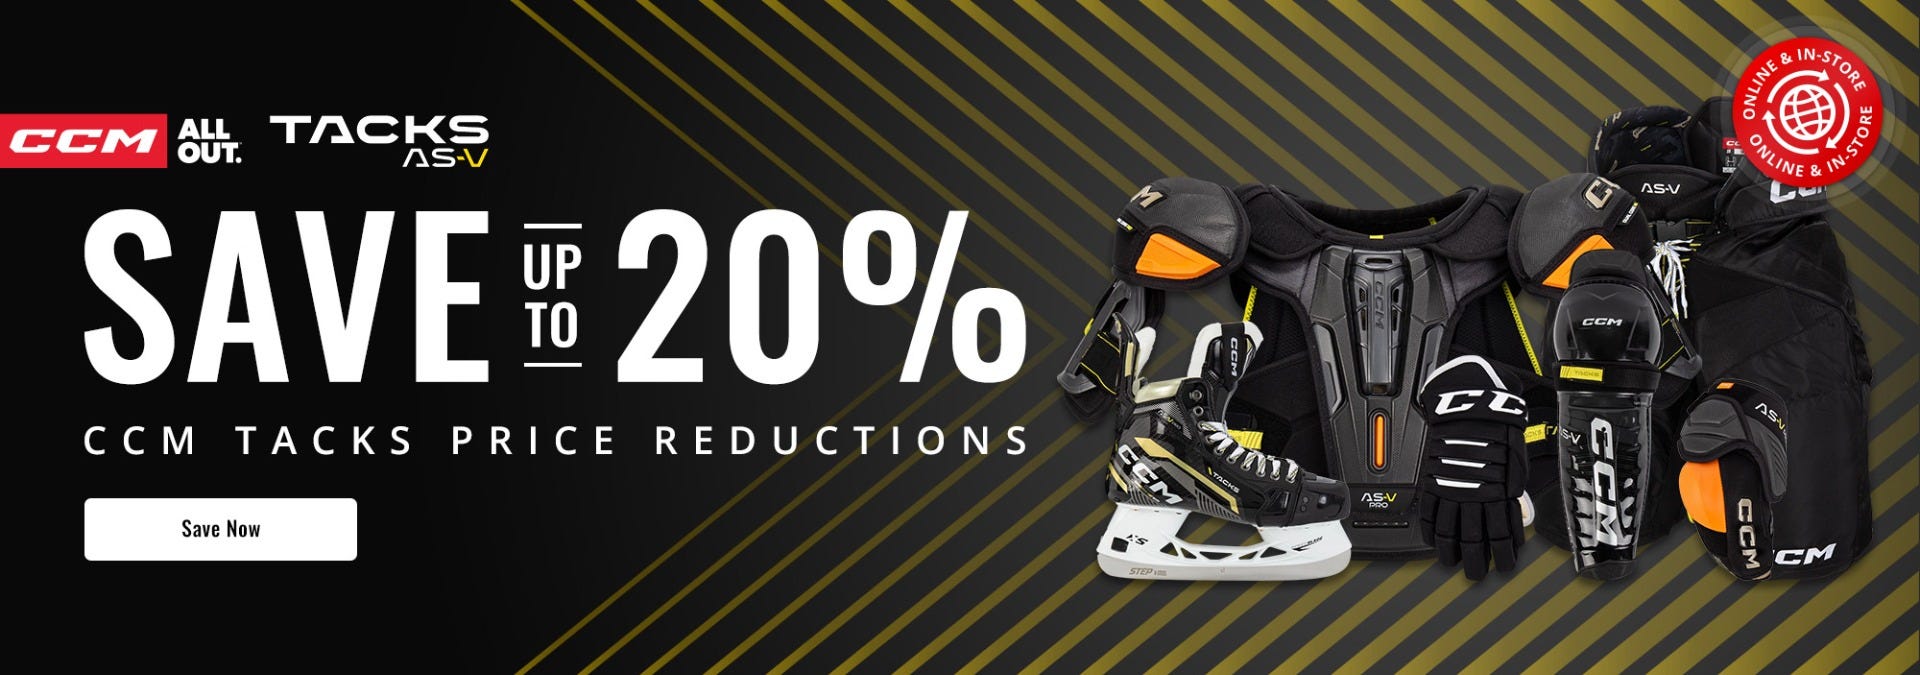 Save up to 20% on CCM Tacks Hockey Equipment